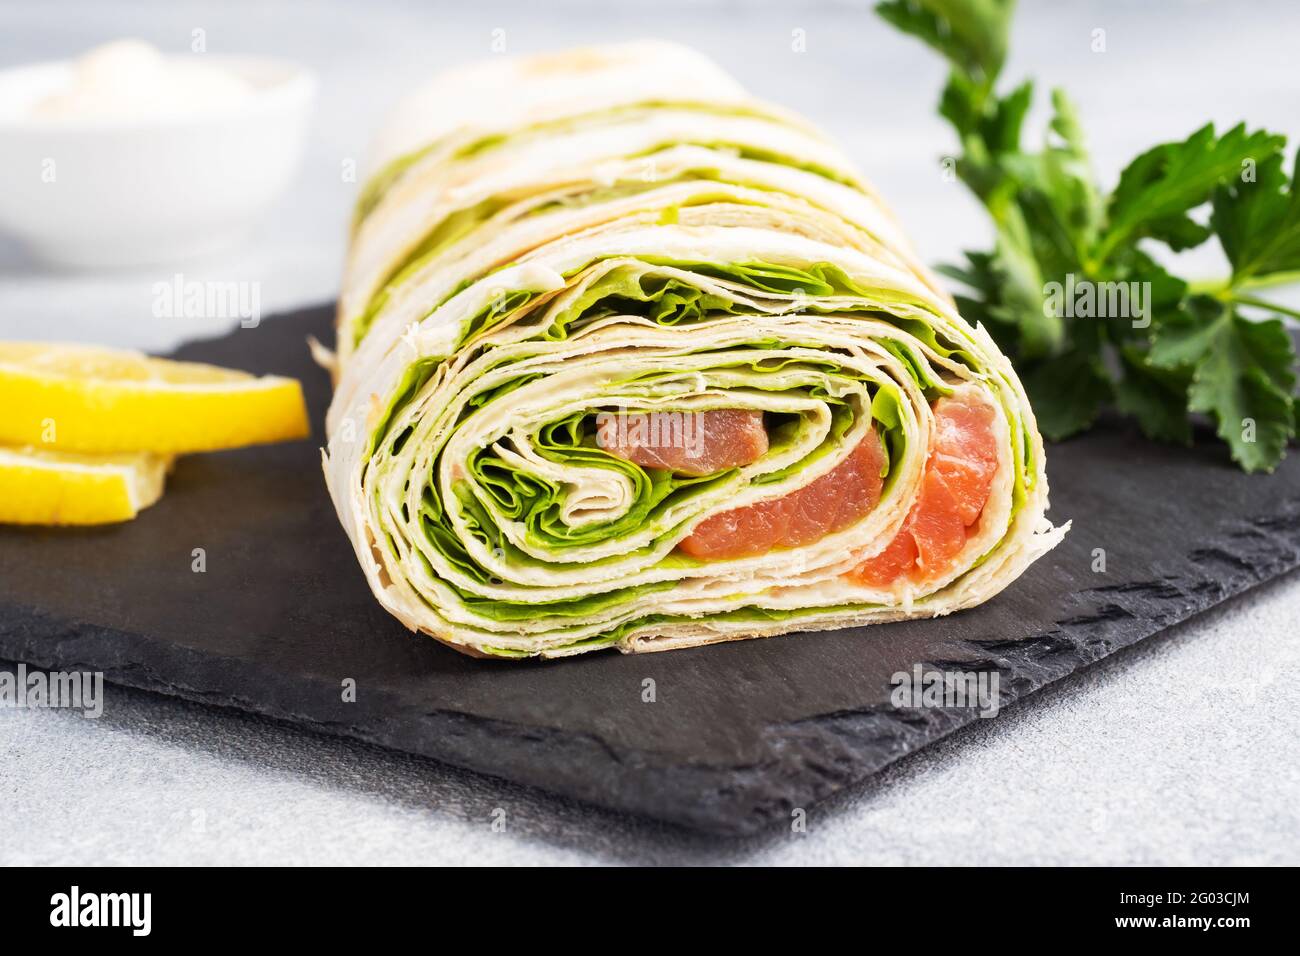 Rolls of thin pita bread and red salted salmon with lettuce leaves On a slate stand, grey concrete background. Copy space Stock Photo